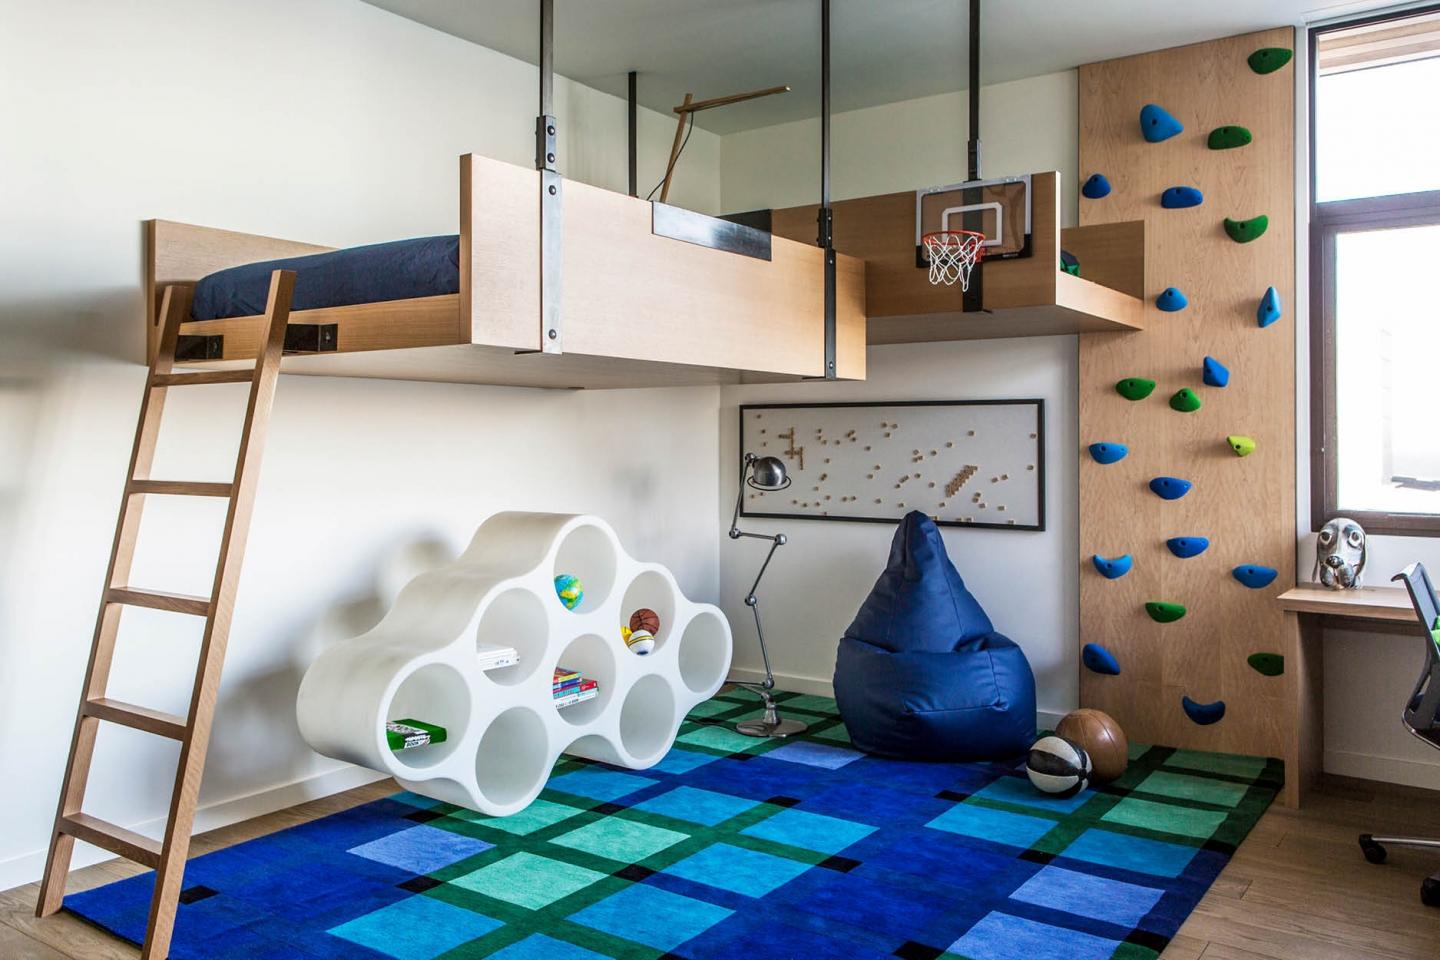 The home is equally enjoyable for the adults as well as the kids, with bedrooms of the latter creatively composed with climbing walls